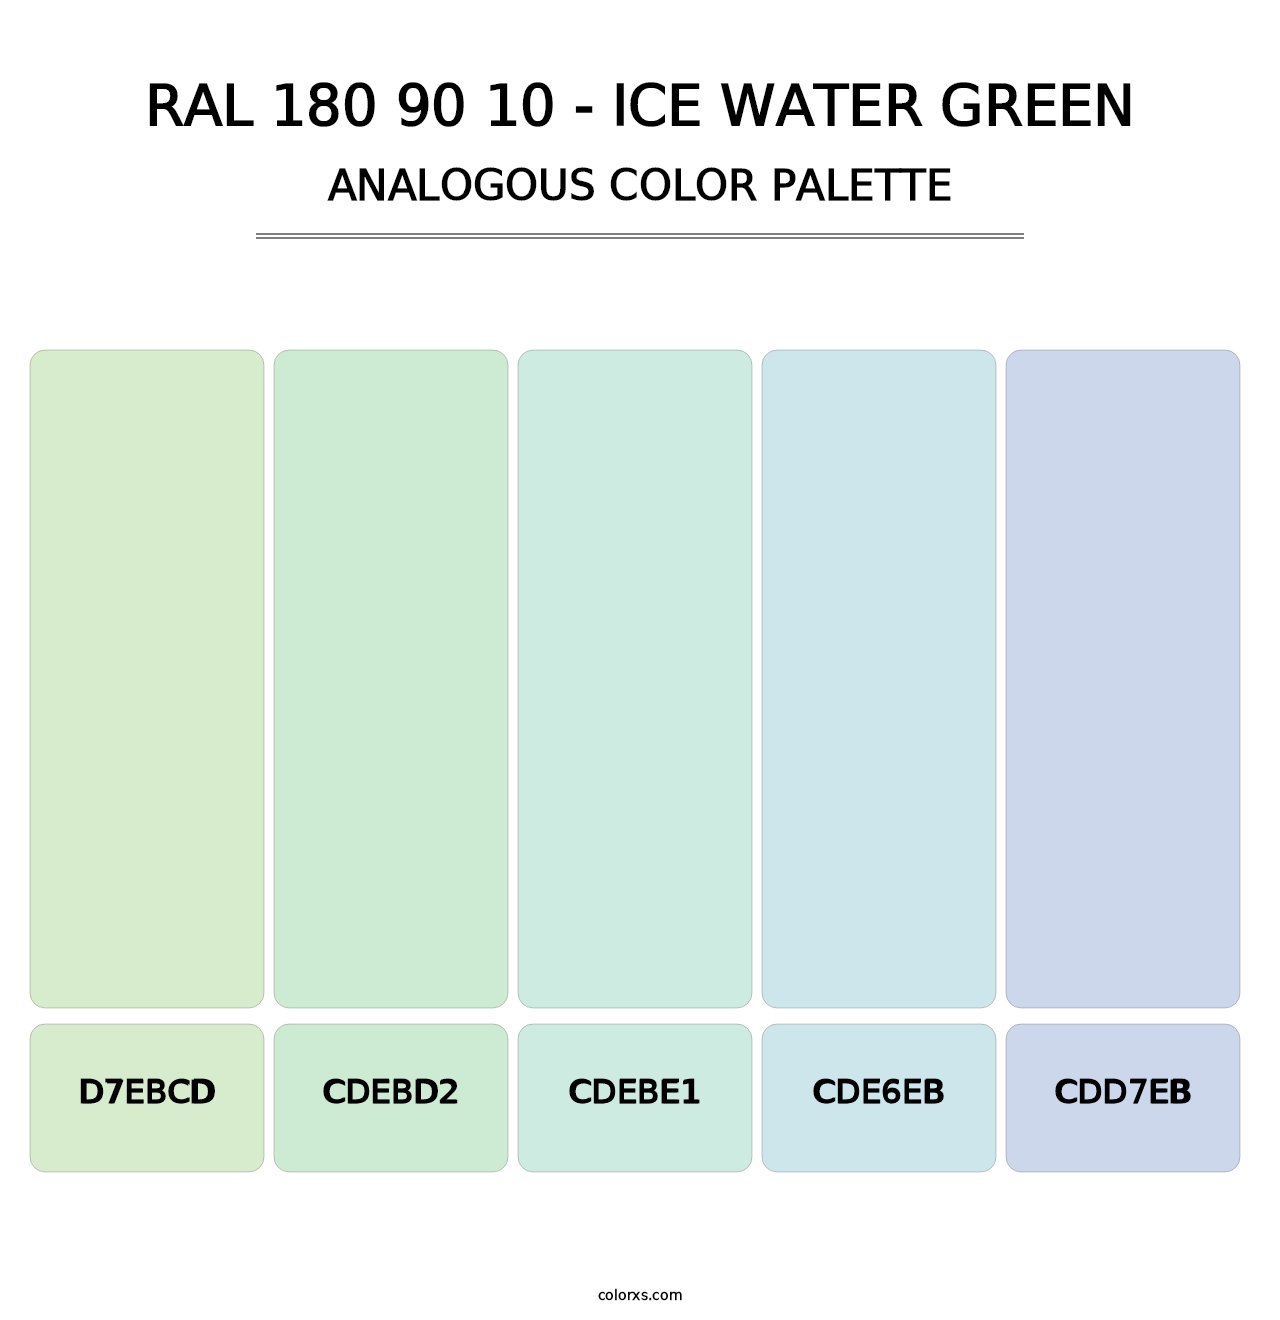 RAL 180 90 10 - Ice Water Green - Analogous Color Palette